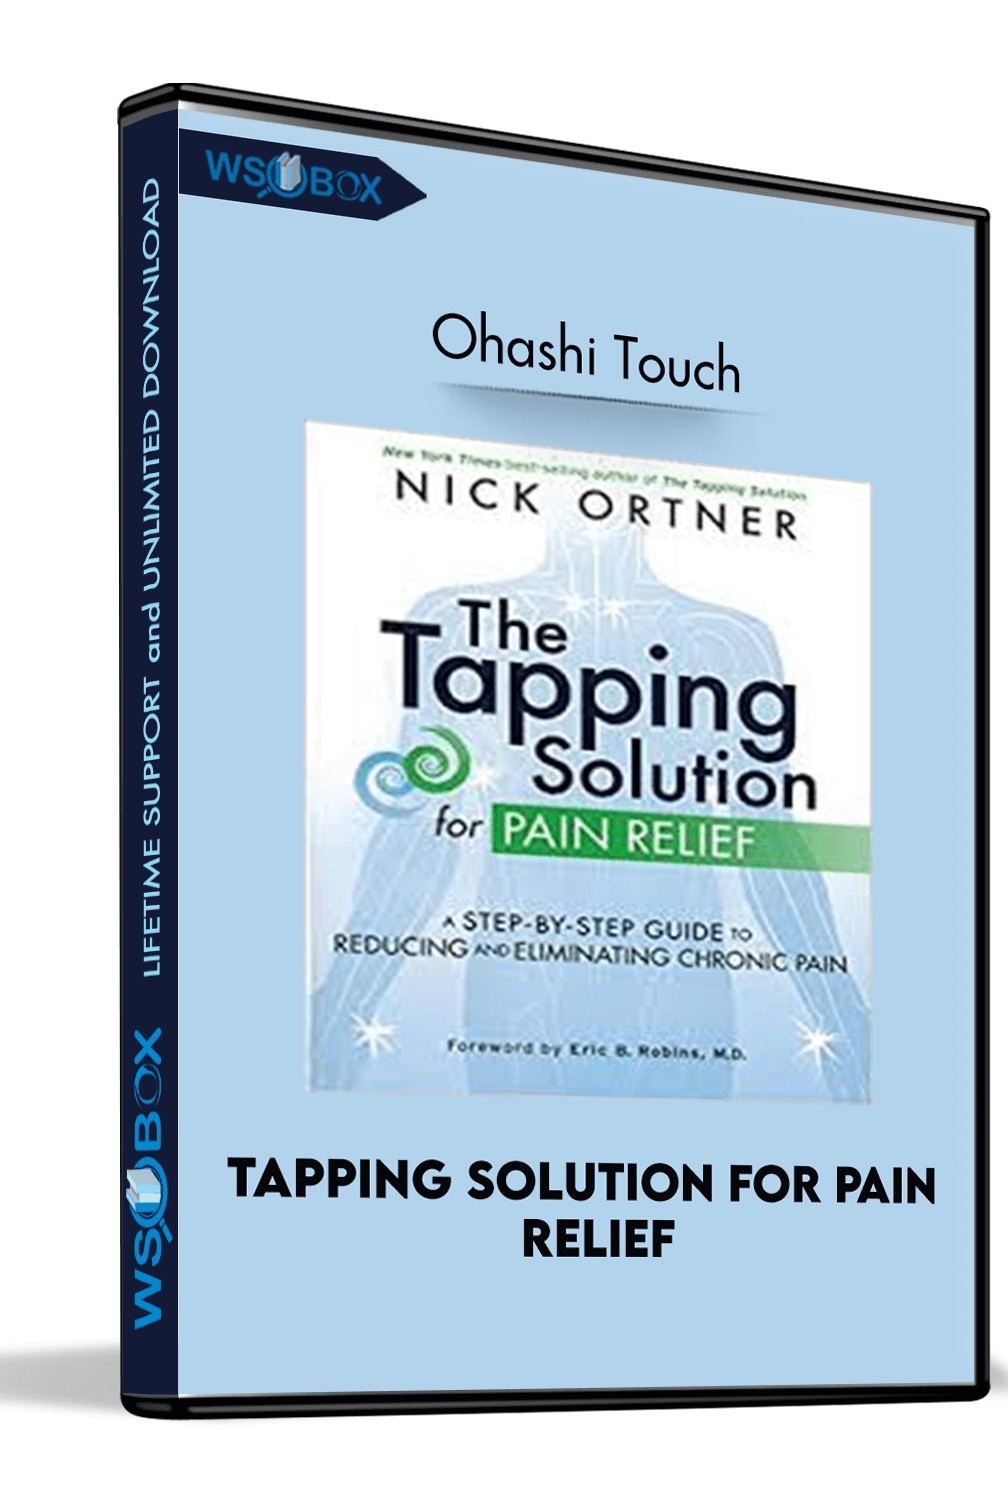 tapping-solution-for-pain-relief-nick-ortner